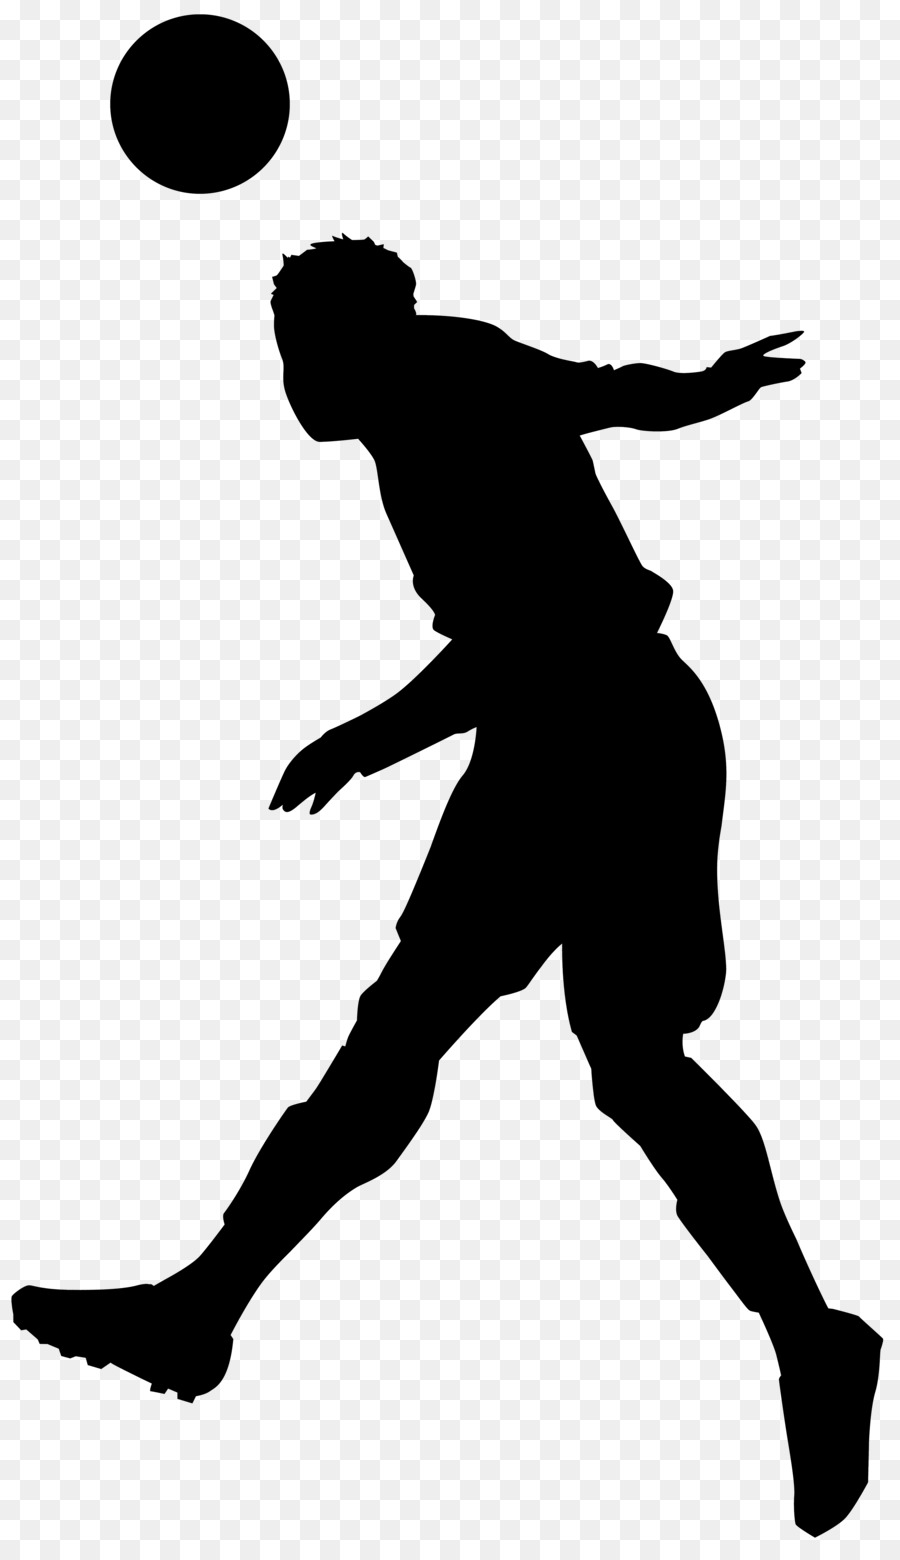 Football player Silhouette Clip art - playing png download - 4638*8000 - Free Transparent Football Player png Download.